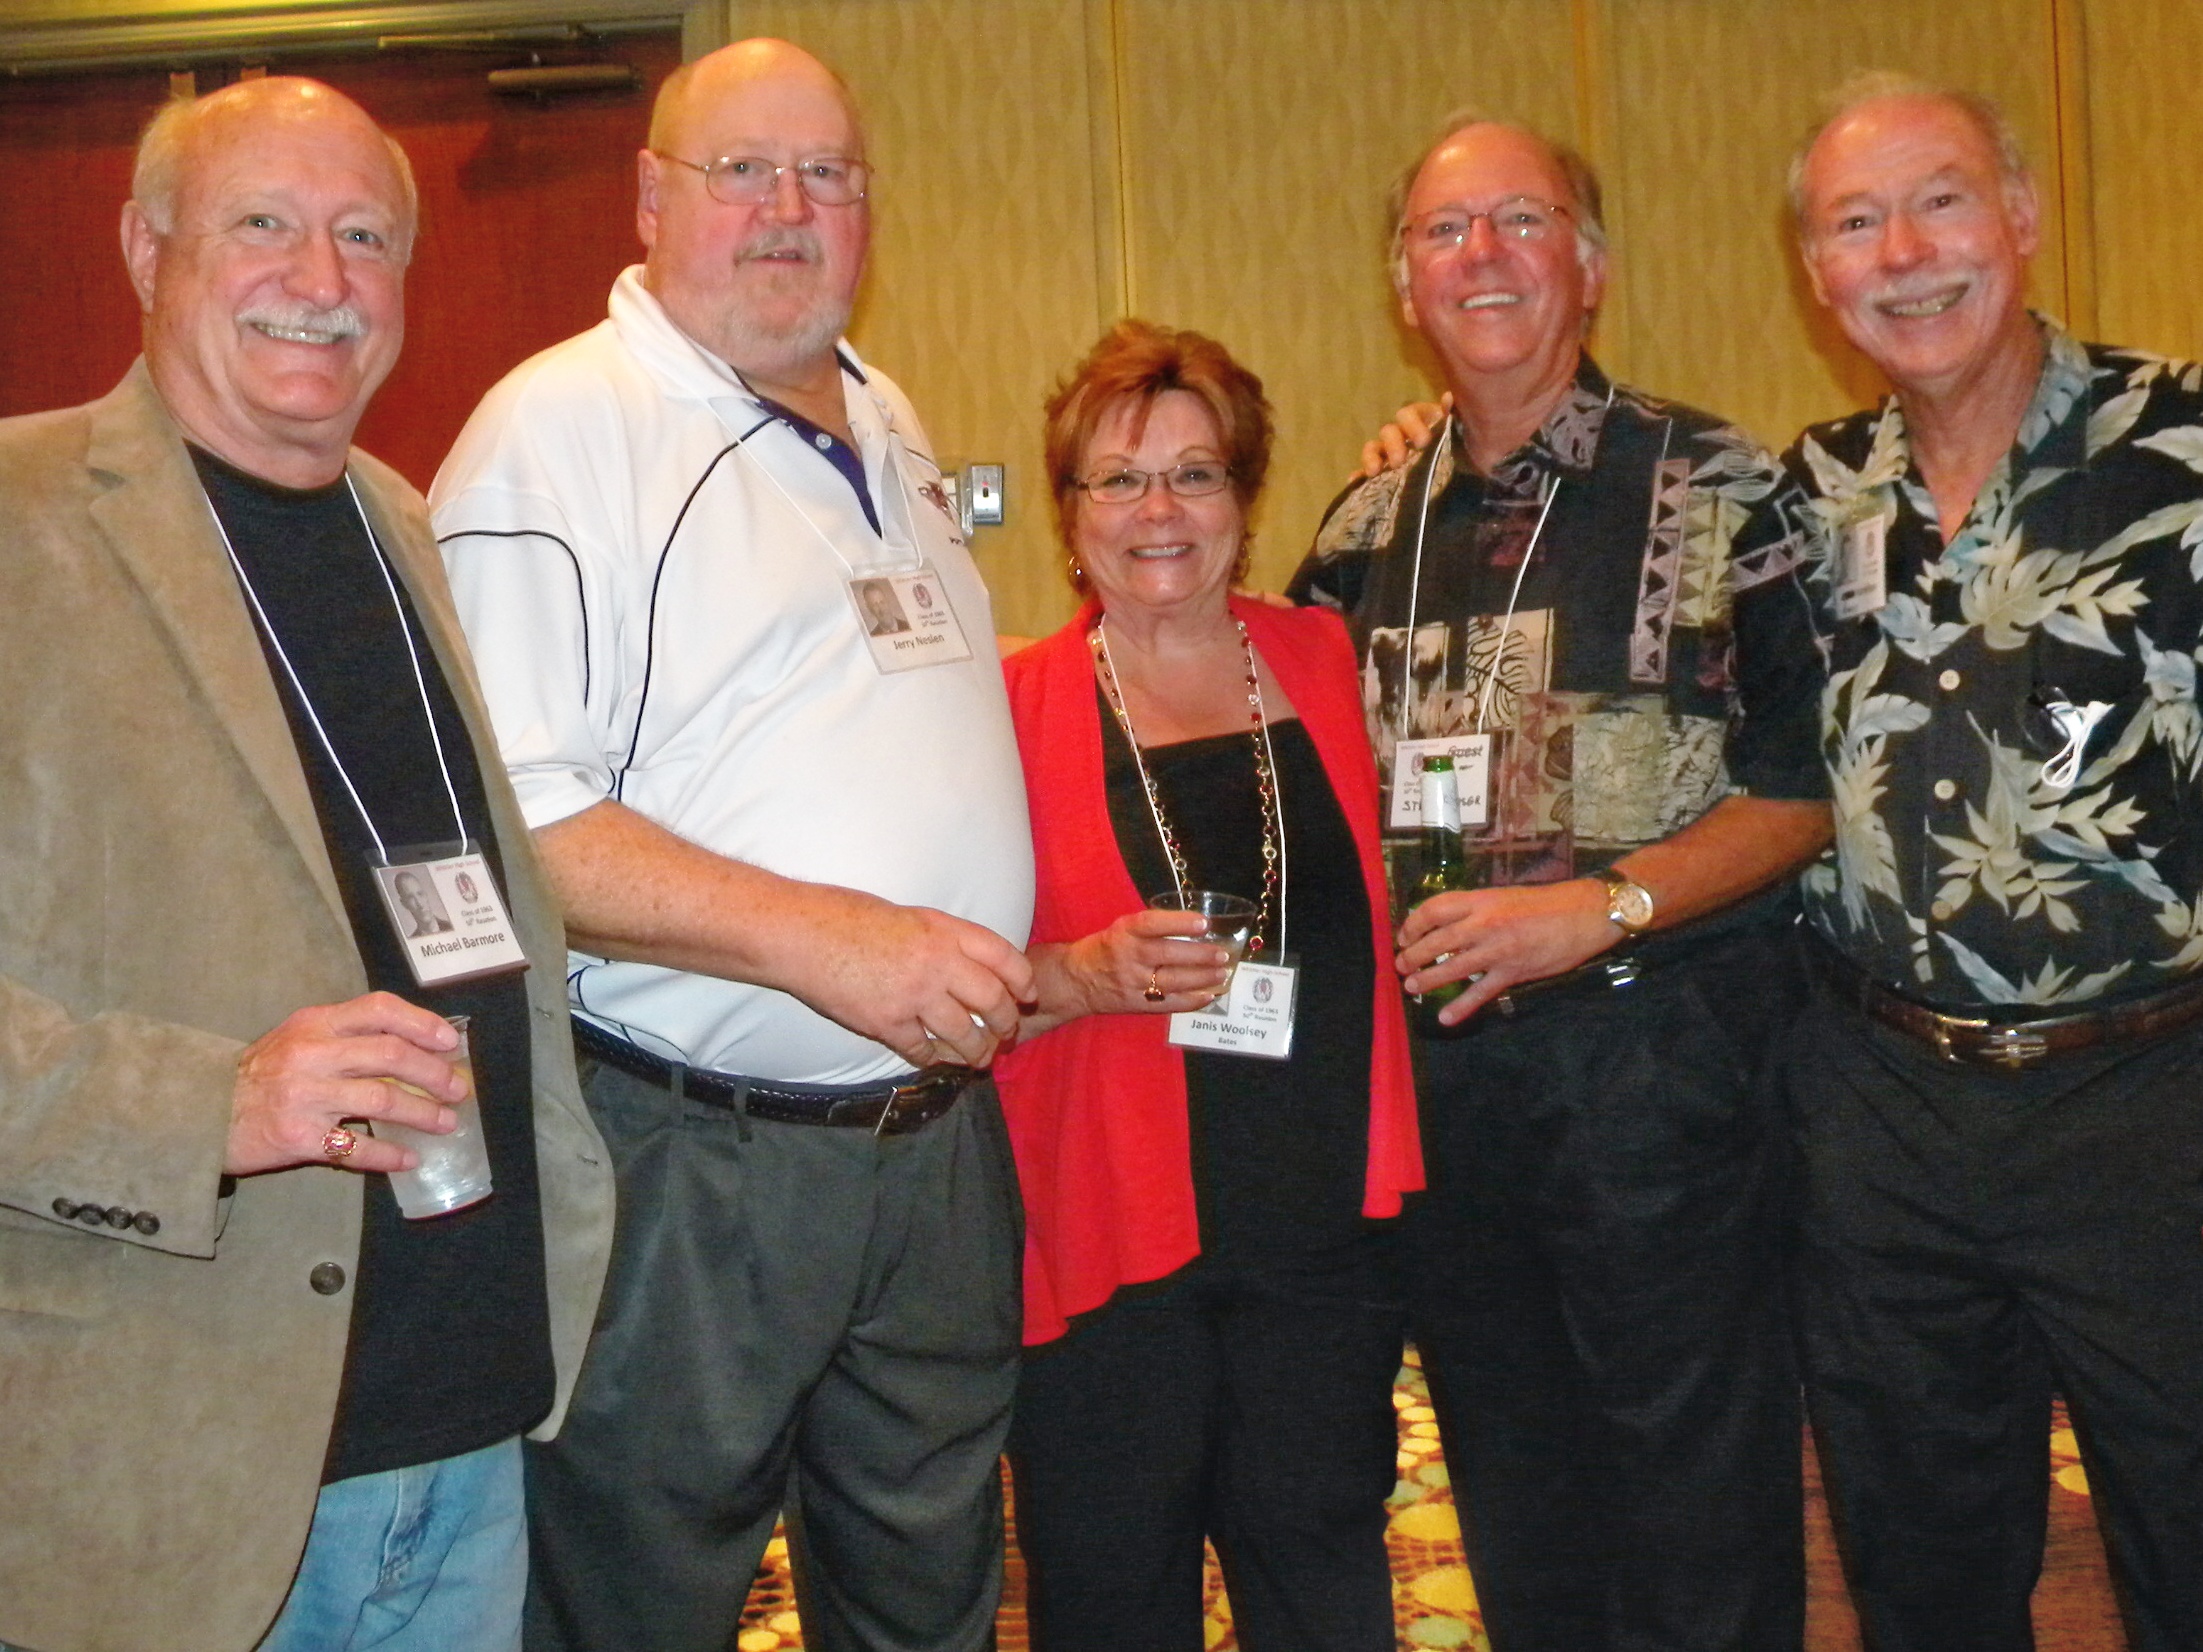 Mike Barmore, Jerry Neslen (now goes by Quayle Neslen), Janis Woolsey, Steve Keiser, Buddy Hamilton